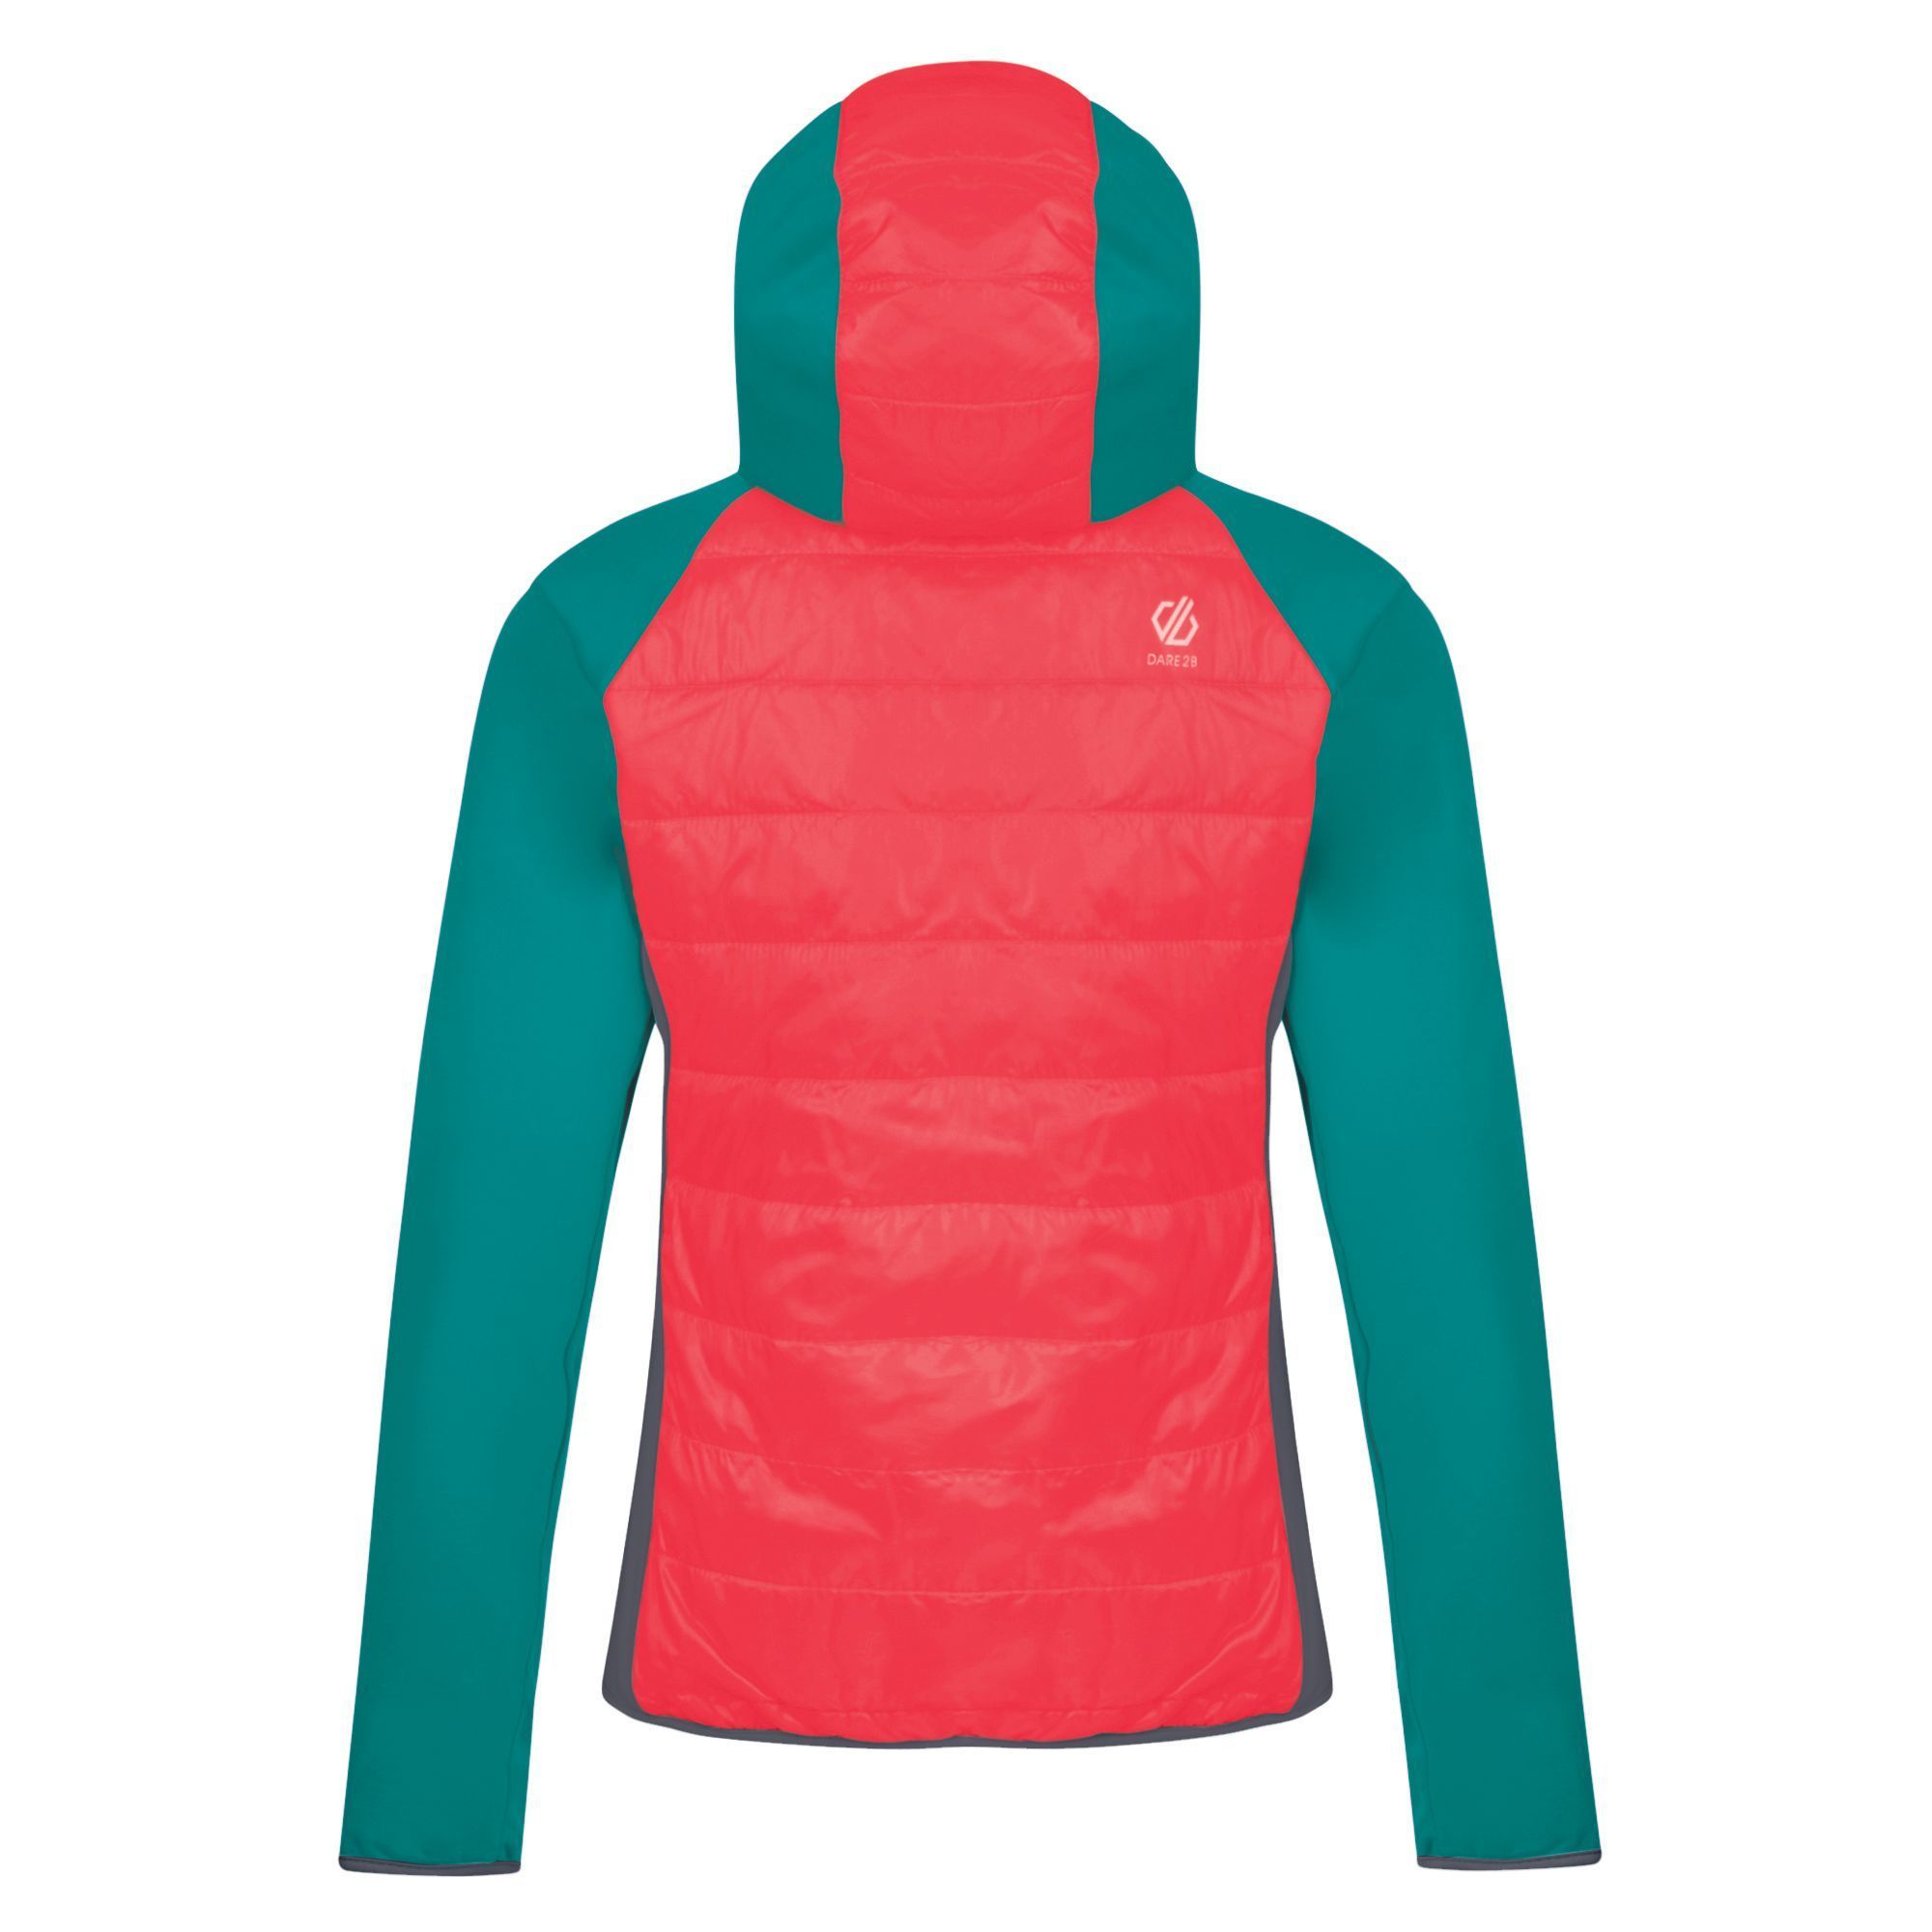 100% Polyester. Alpaca wool mix insulation. Natural wicking and  odour control properties. Grown on hood. 2 x lower zip pockets.